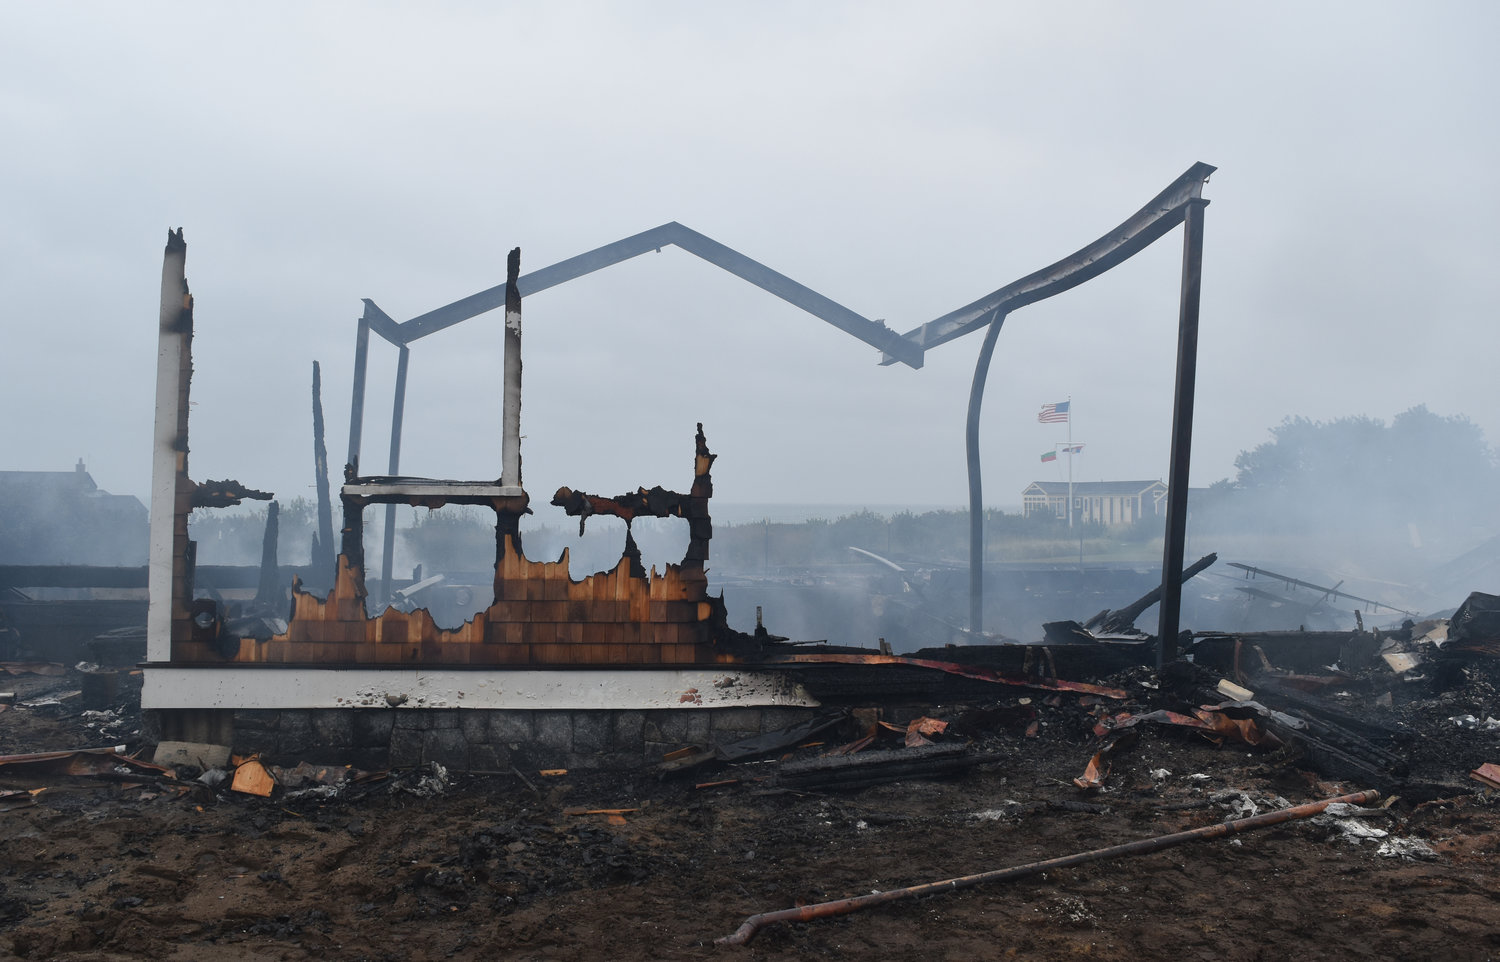 The remnants of the East Tristram Avenue home after it was destroyed by fire early Saturday morning. Owner Richard Phillips was staying in the beach house visible in the background during construction of the home.